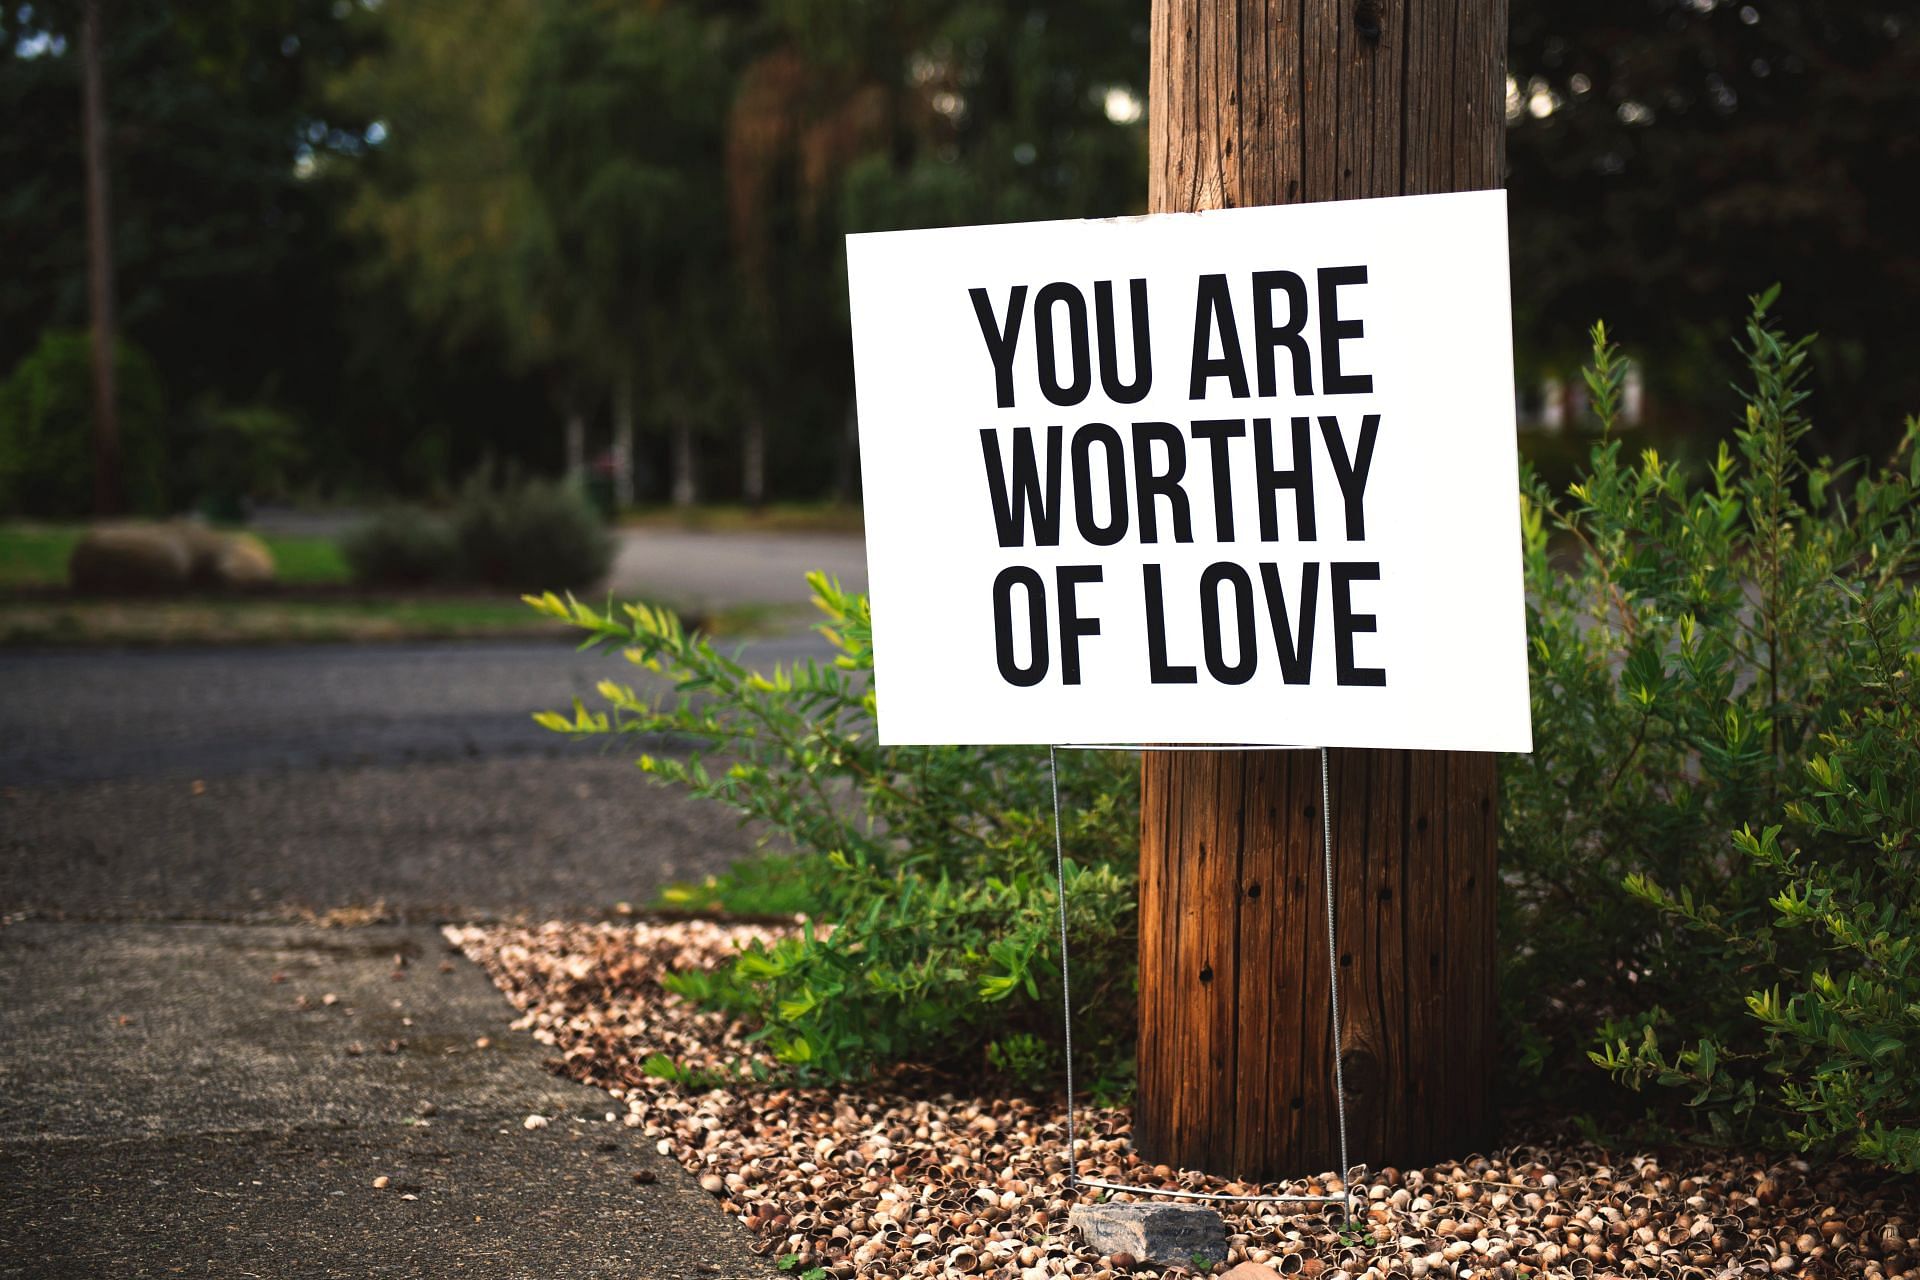 You are always going to be worthy of love and care. Don&#039;t let others dictate it otherwise. (Image via Pexels/ Tom Mossholder)